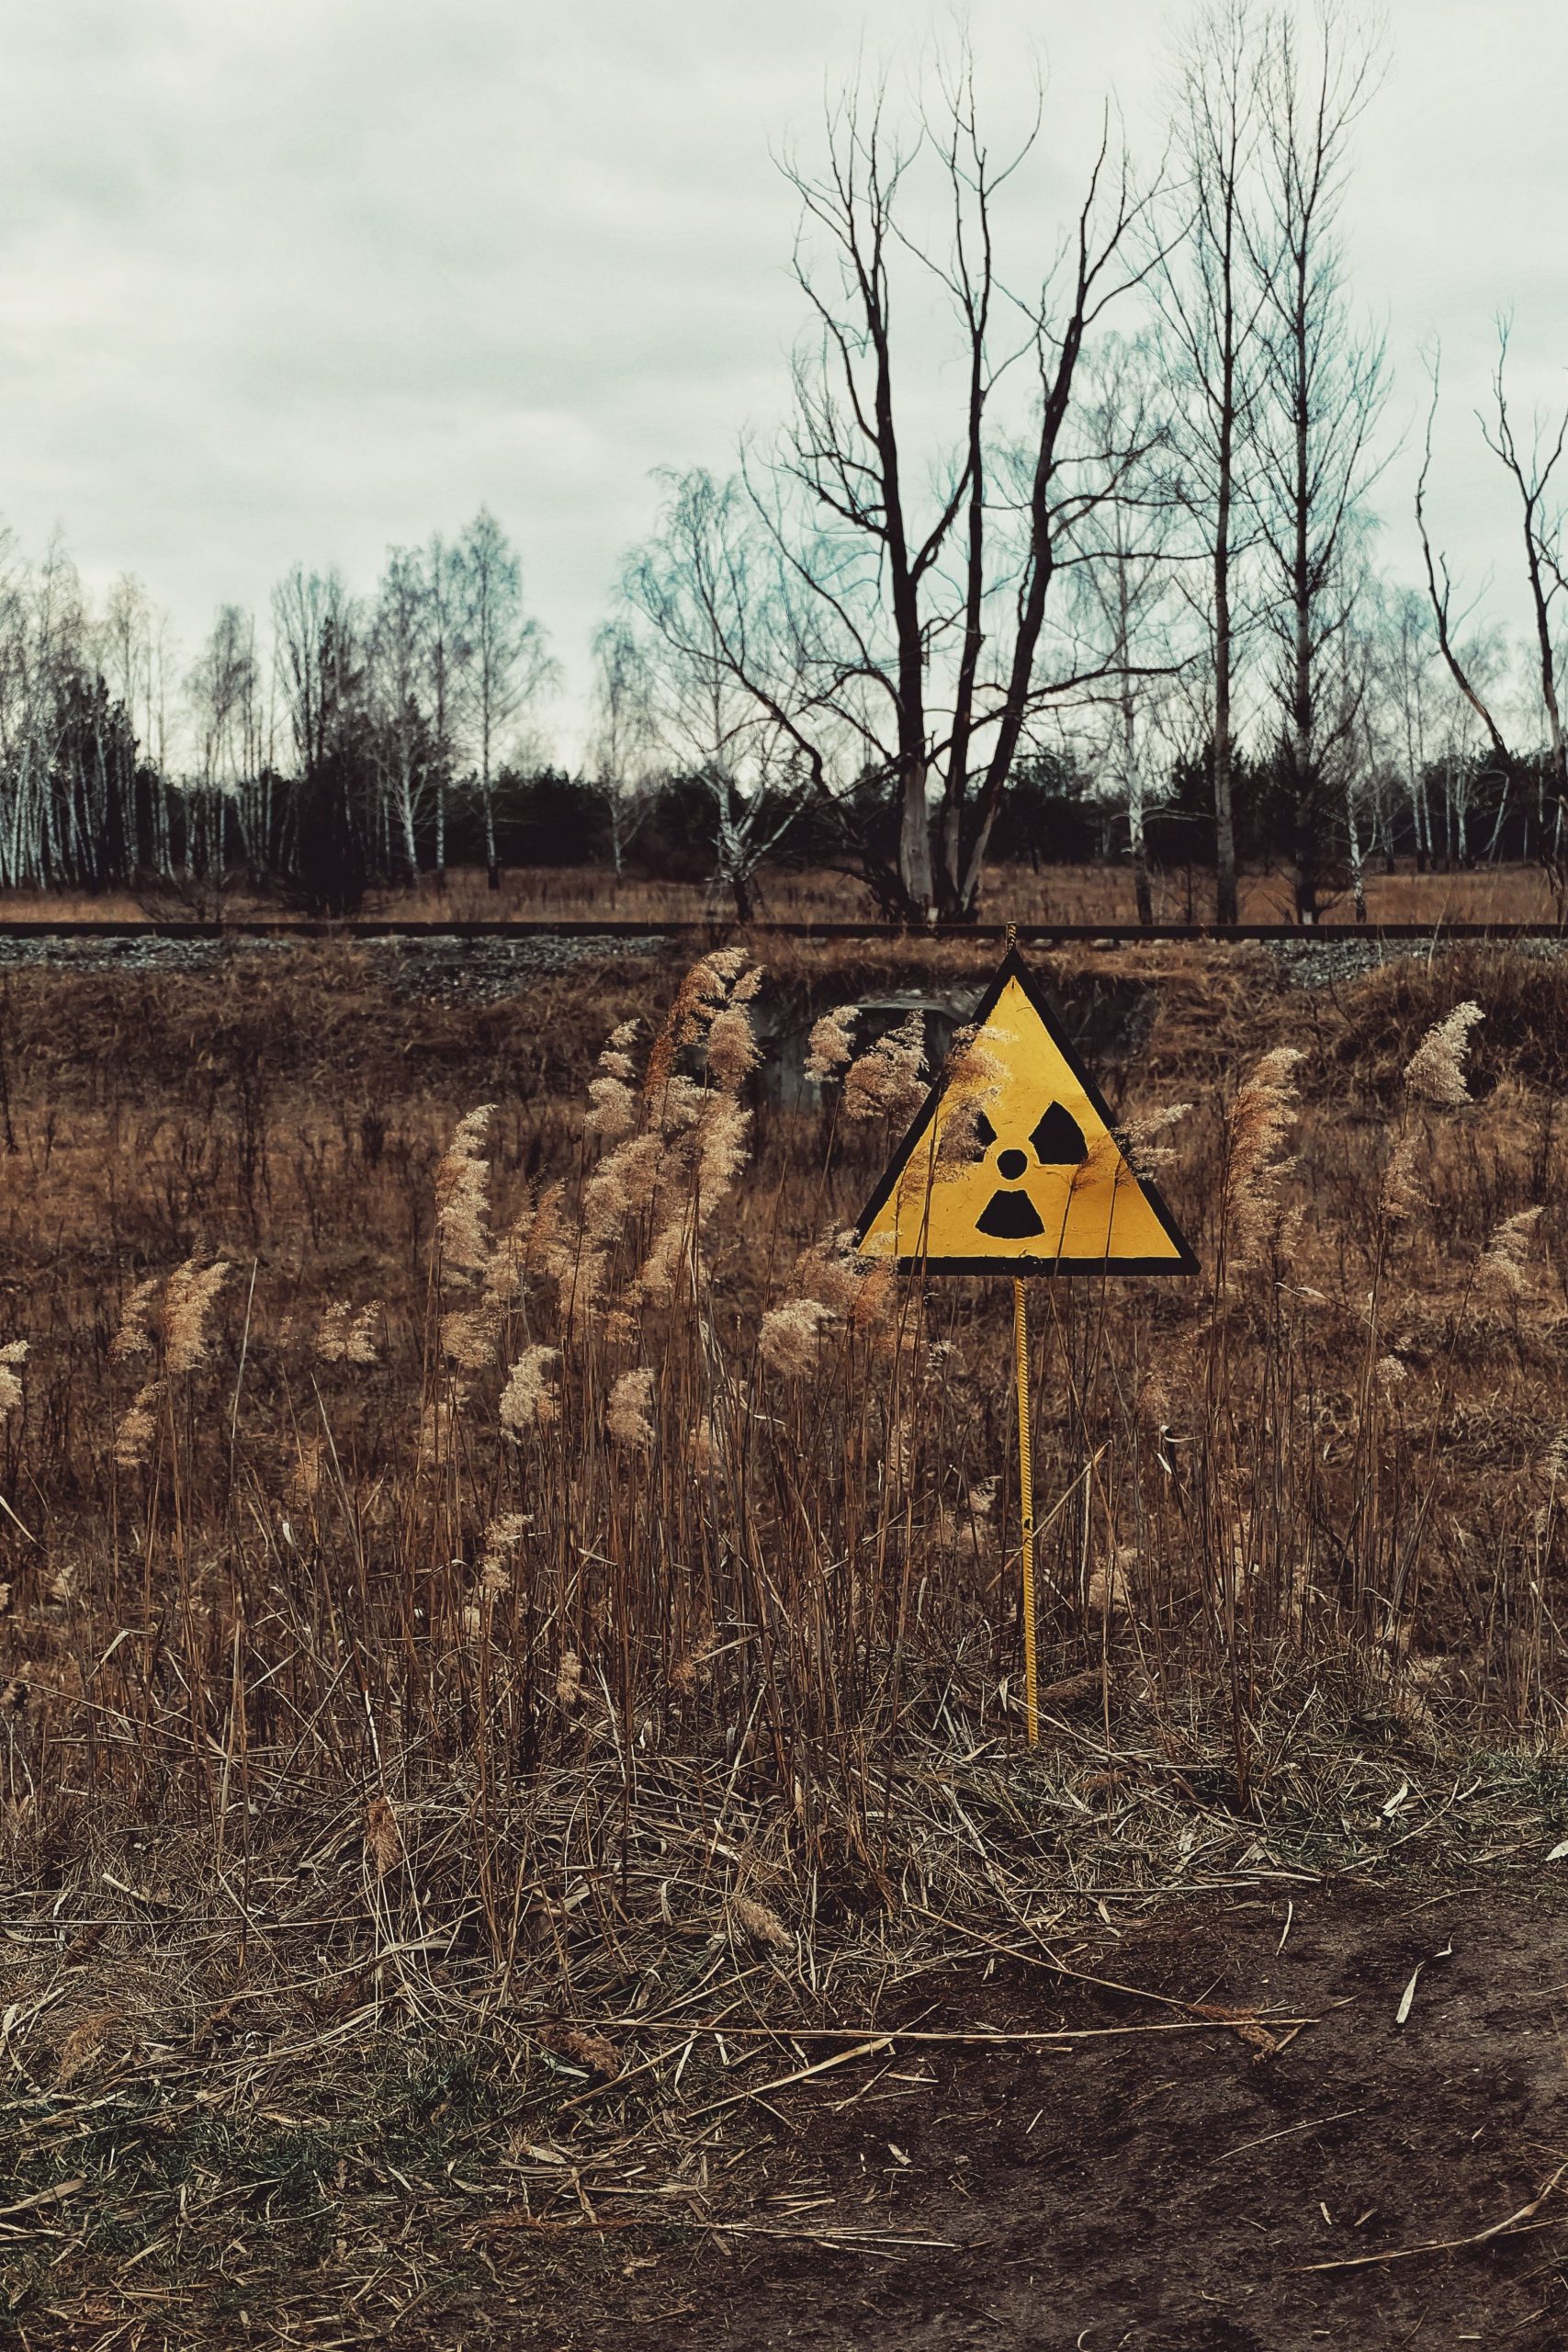 Almost half of Chernobyl nuclear plant staff was able to rotate, IAEA says